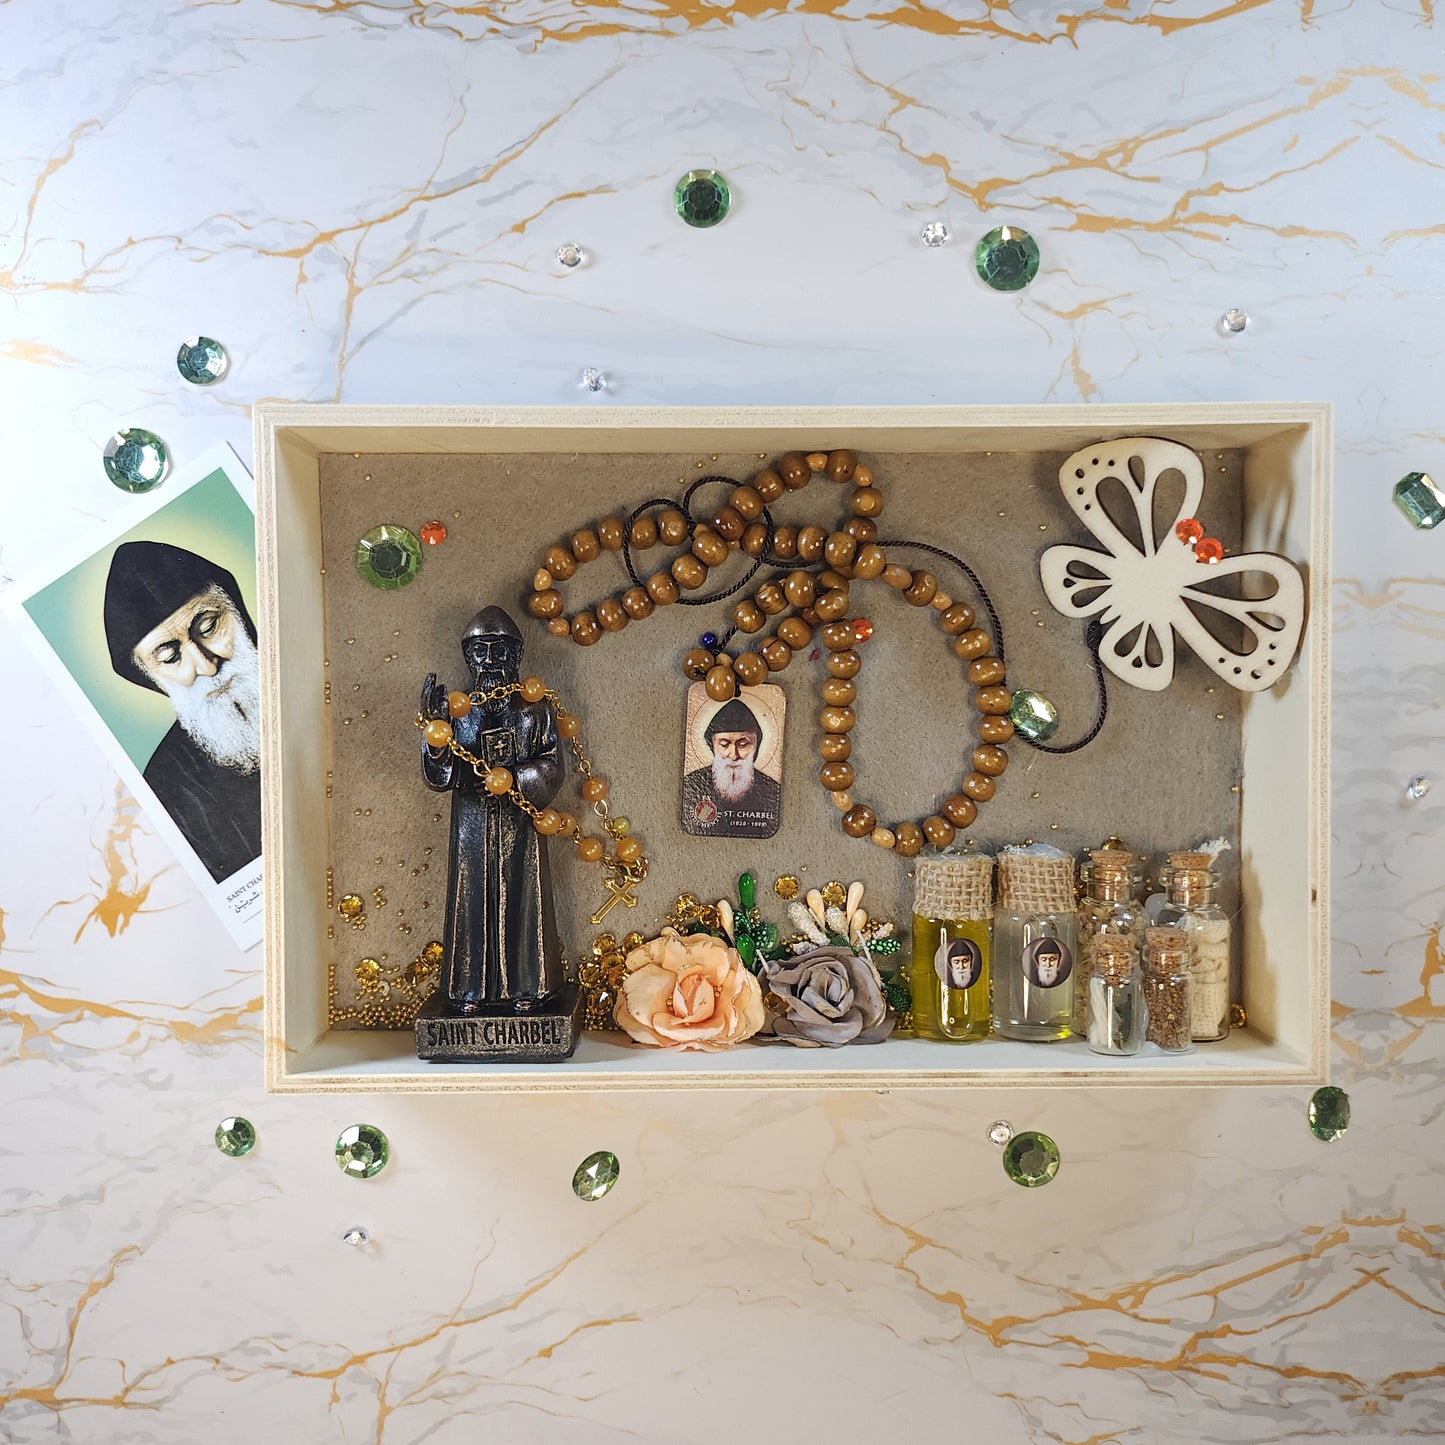 Saint Charbel Statue Box - Our Lady of Gifts